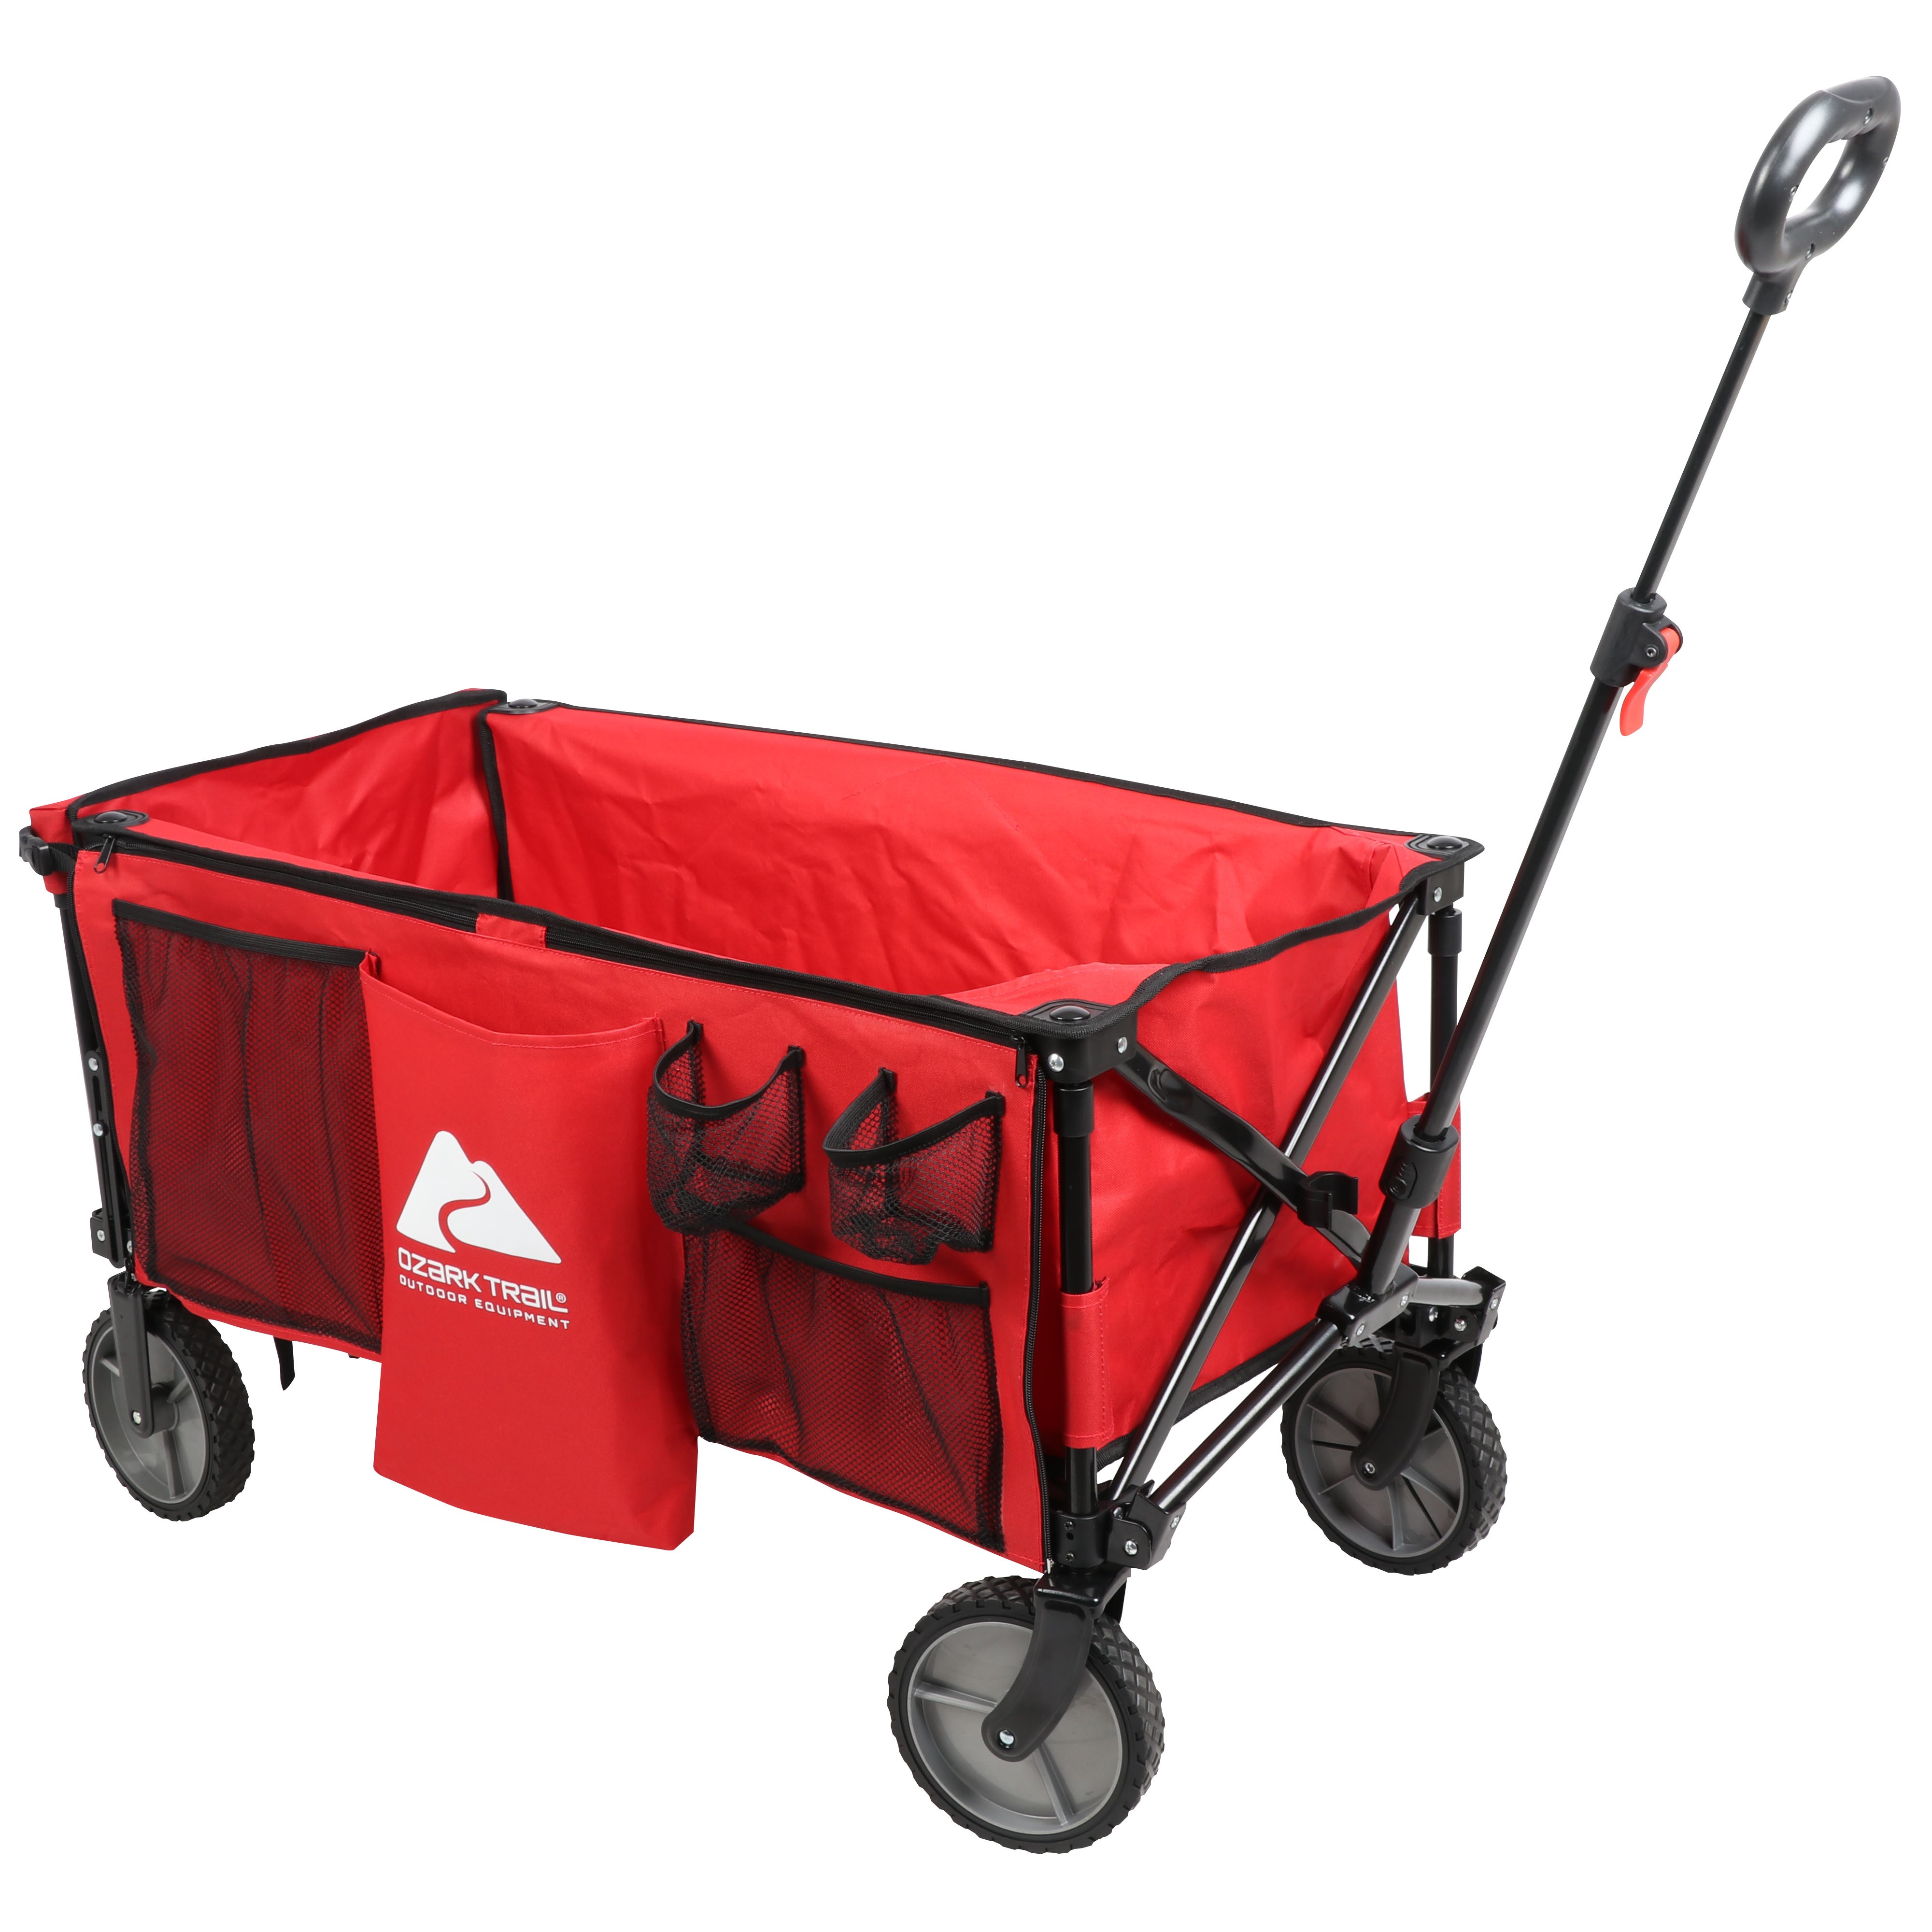 Ozark Trail Camping Utility Wagon with Tailgate & Extension Handle, Red - image 1 of 10